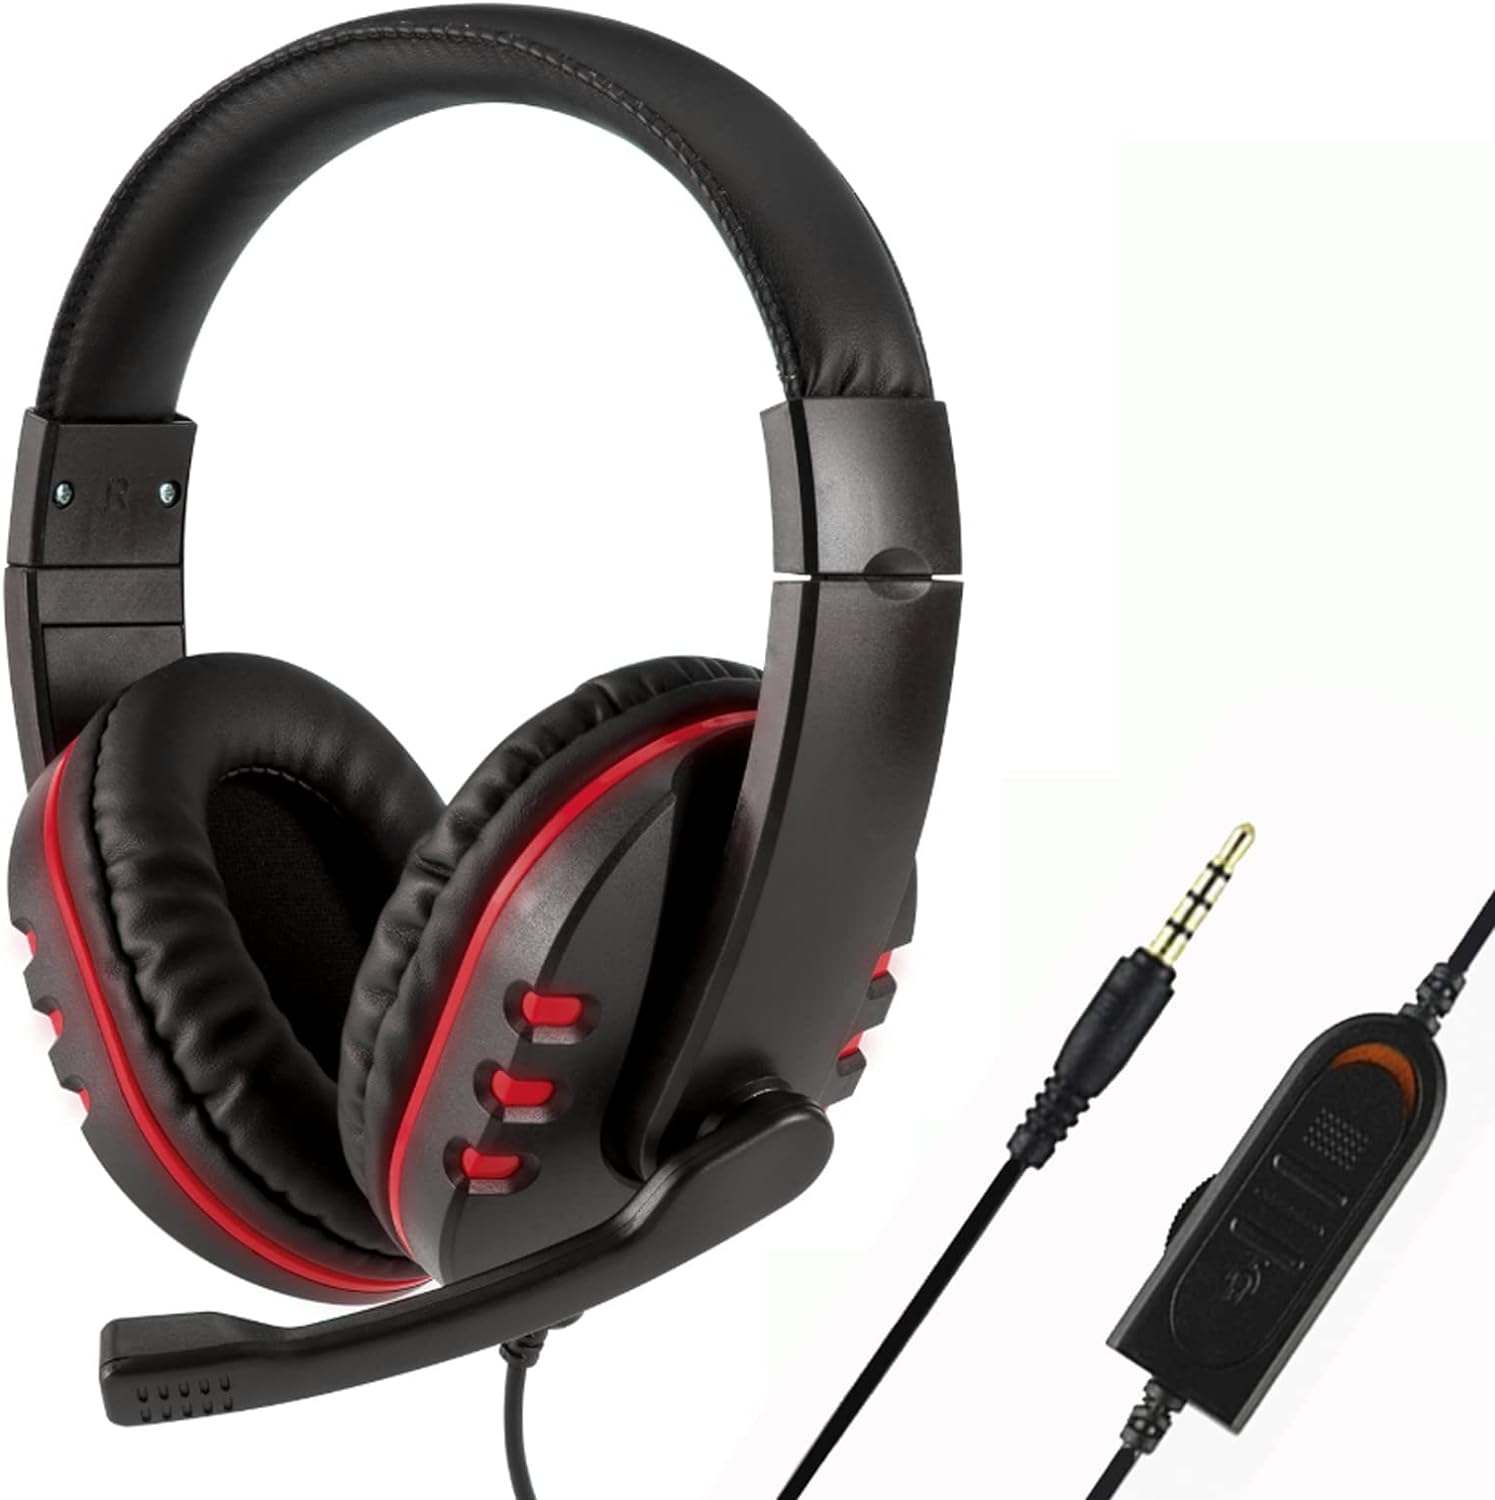 DAYONG Gaming Headset,3.5mm Wired Over-Head Stereo Headband Noise Isolating Over Ear Headphone,Game Headset with Microphone Volume Control,Compatible with Laptop,PS4 (Black/Red)